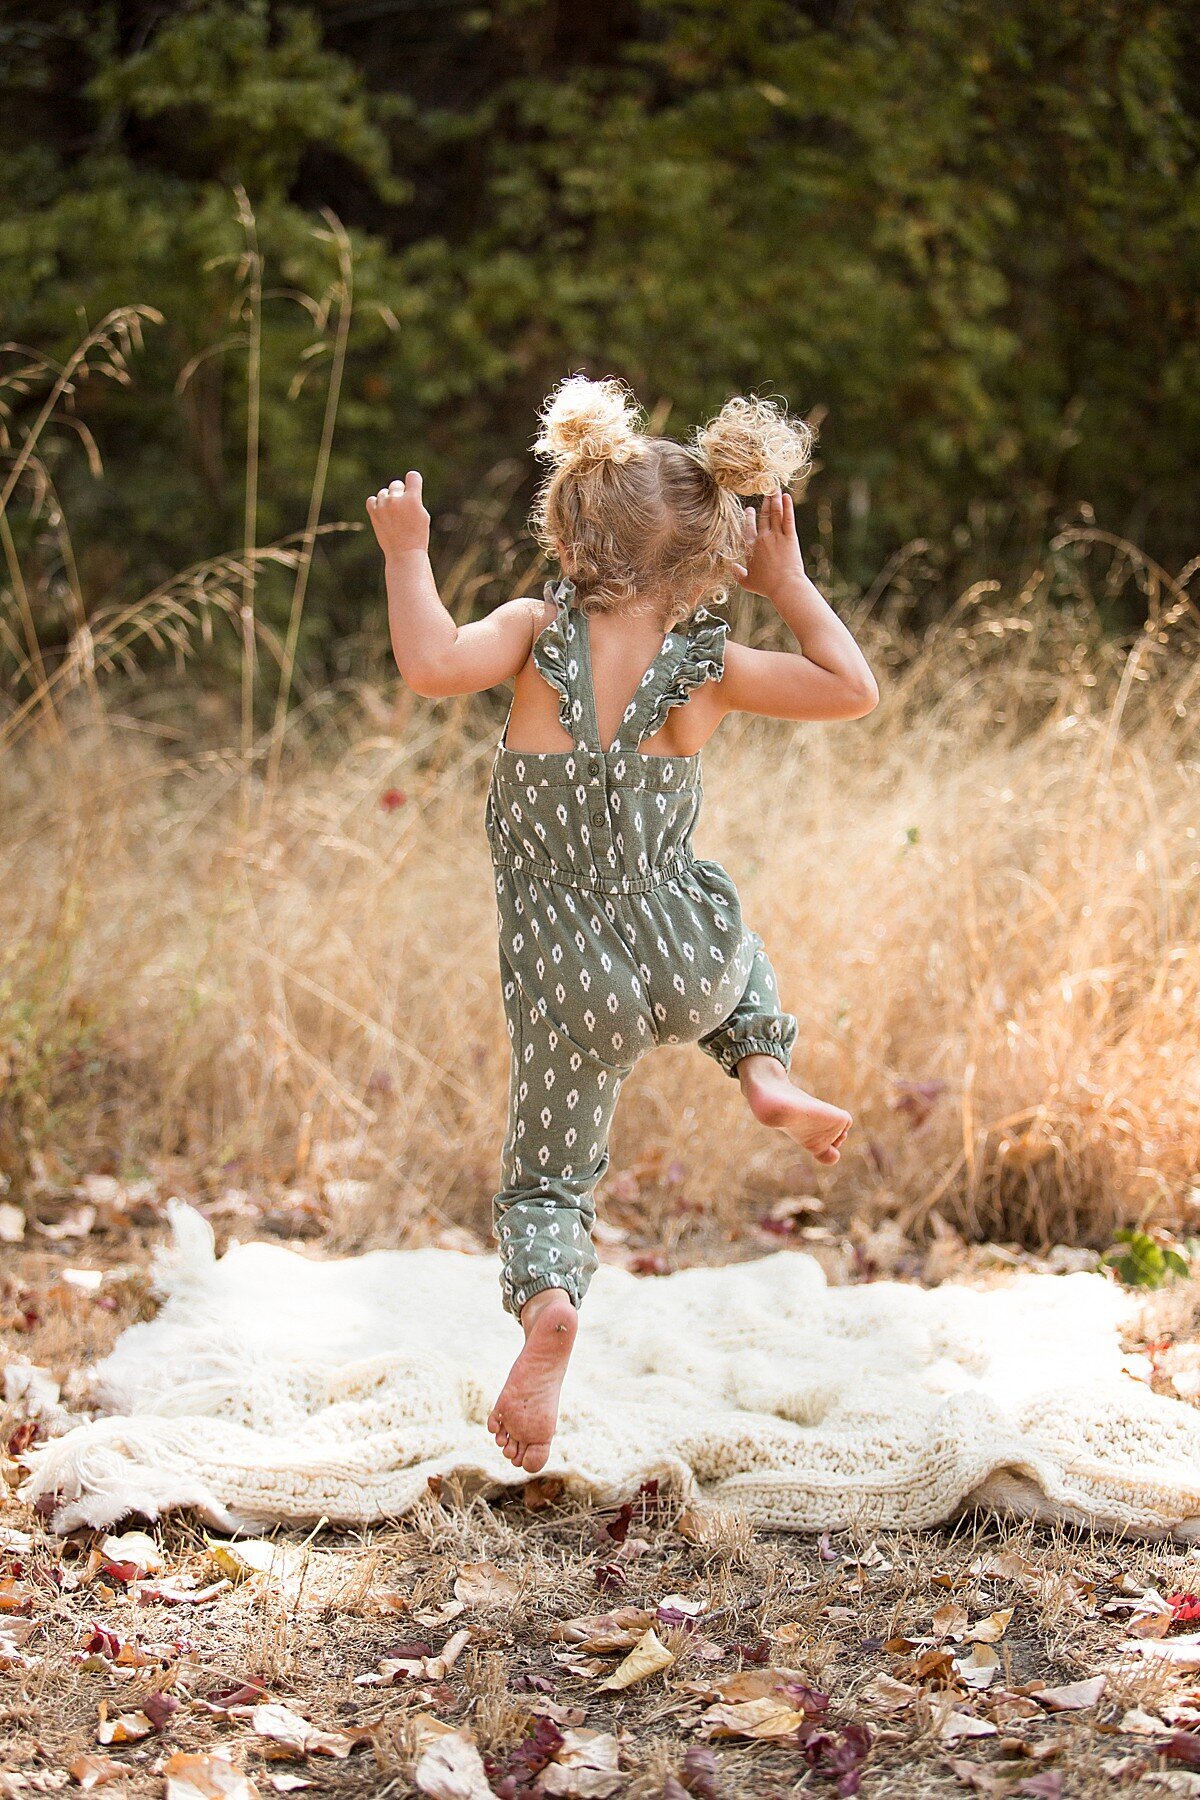 Cute toddler girl with pigtails jumping on a blanket